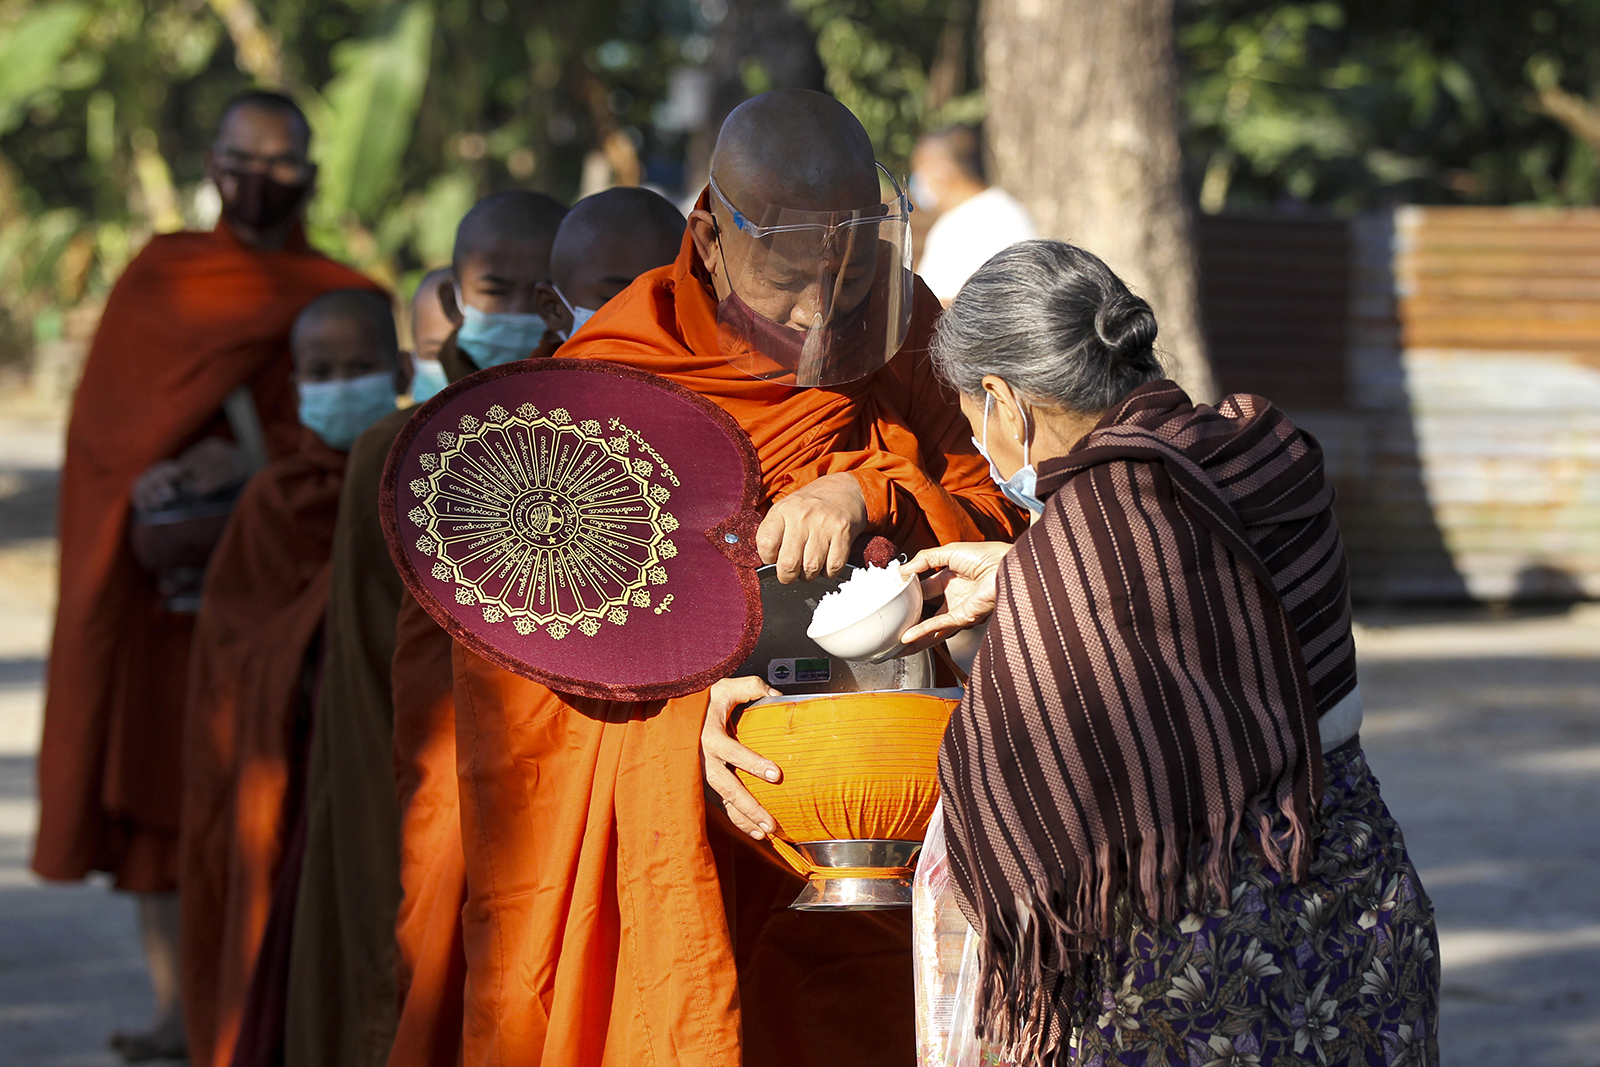 A Buddhist devotee donates alms to a Buddhist monk, Thursday, Dec. 10, 2020, on the outskirts of Yangon, Myanmar. (AP Photo/Thein Zaw)